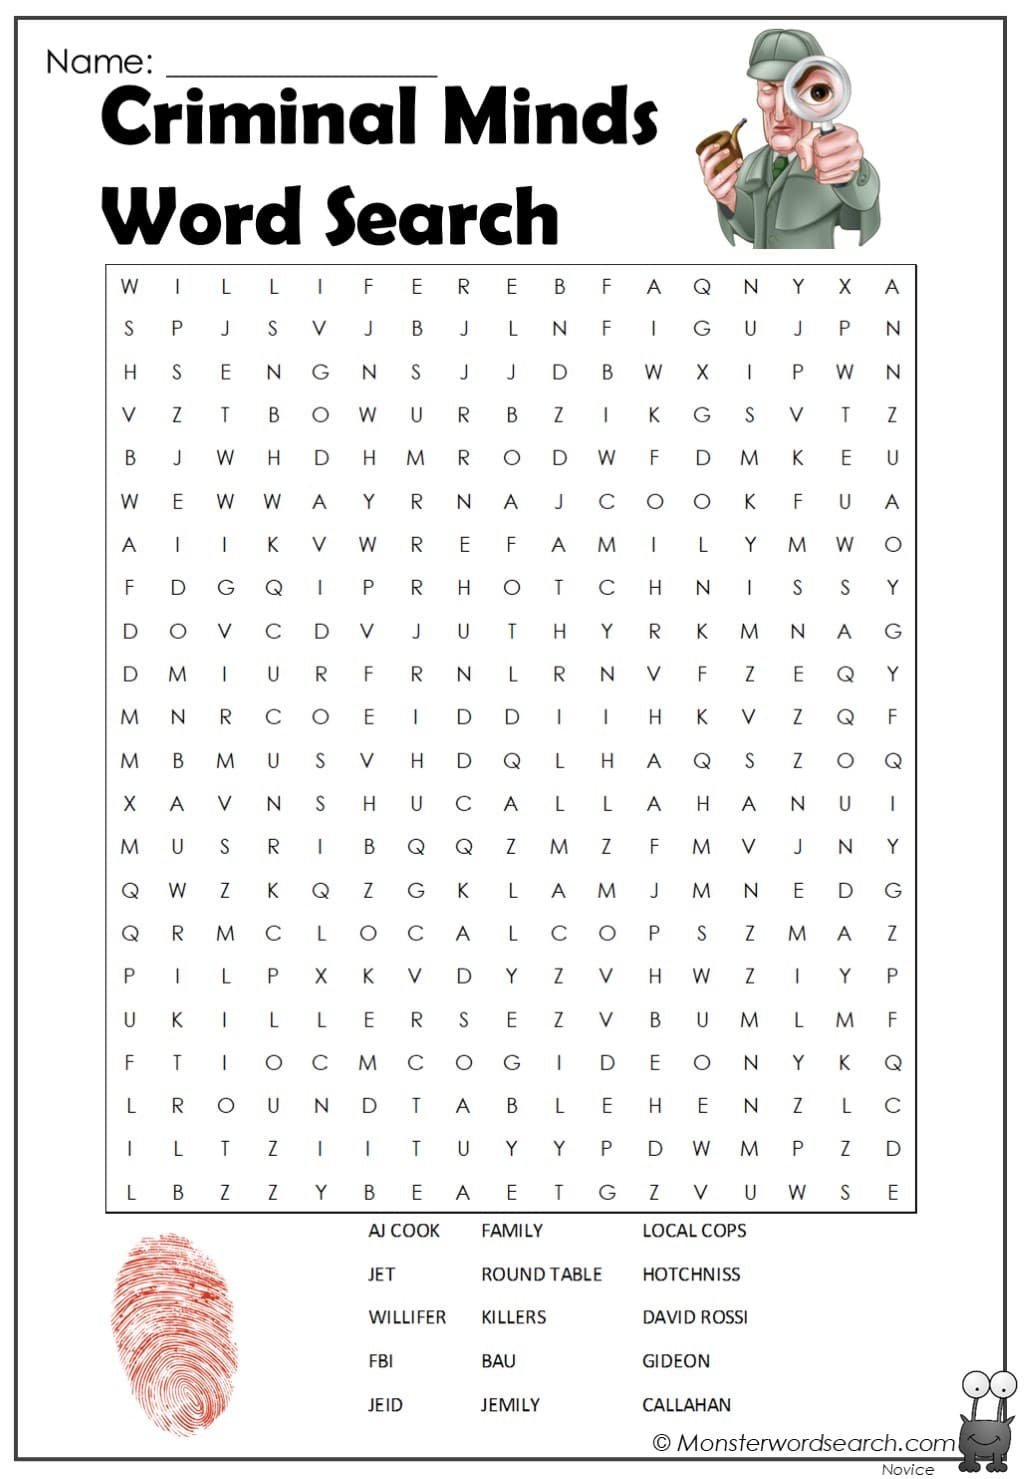 Criminal Minds Word Search